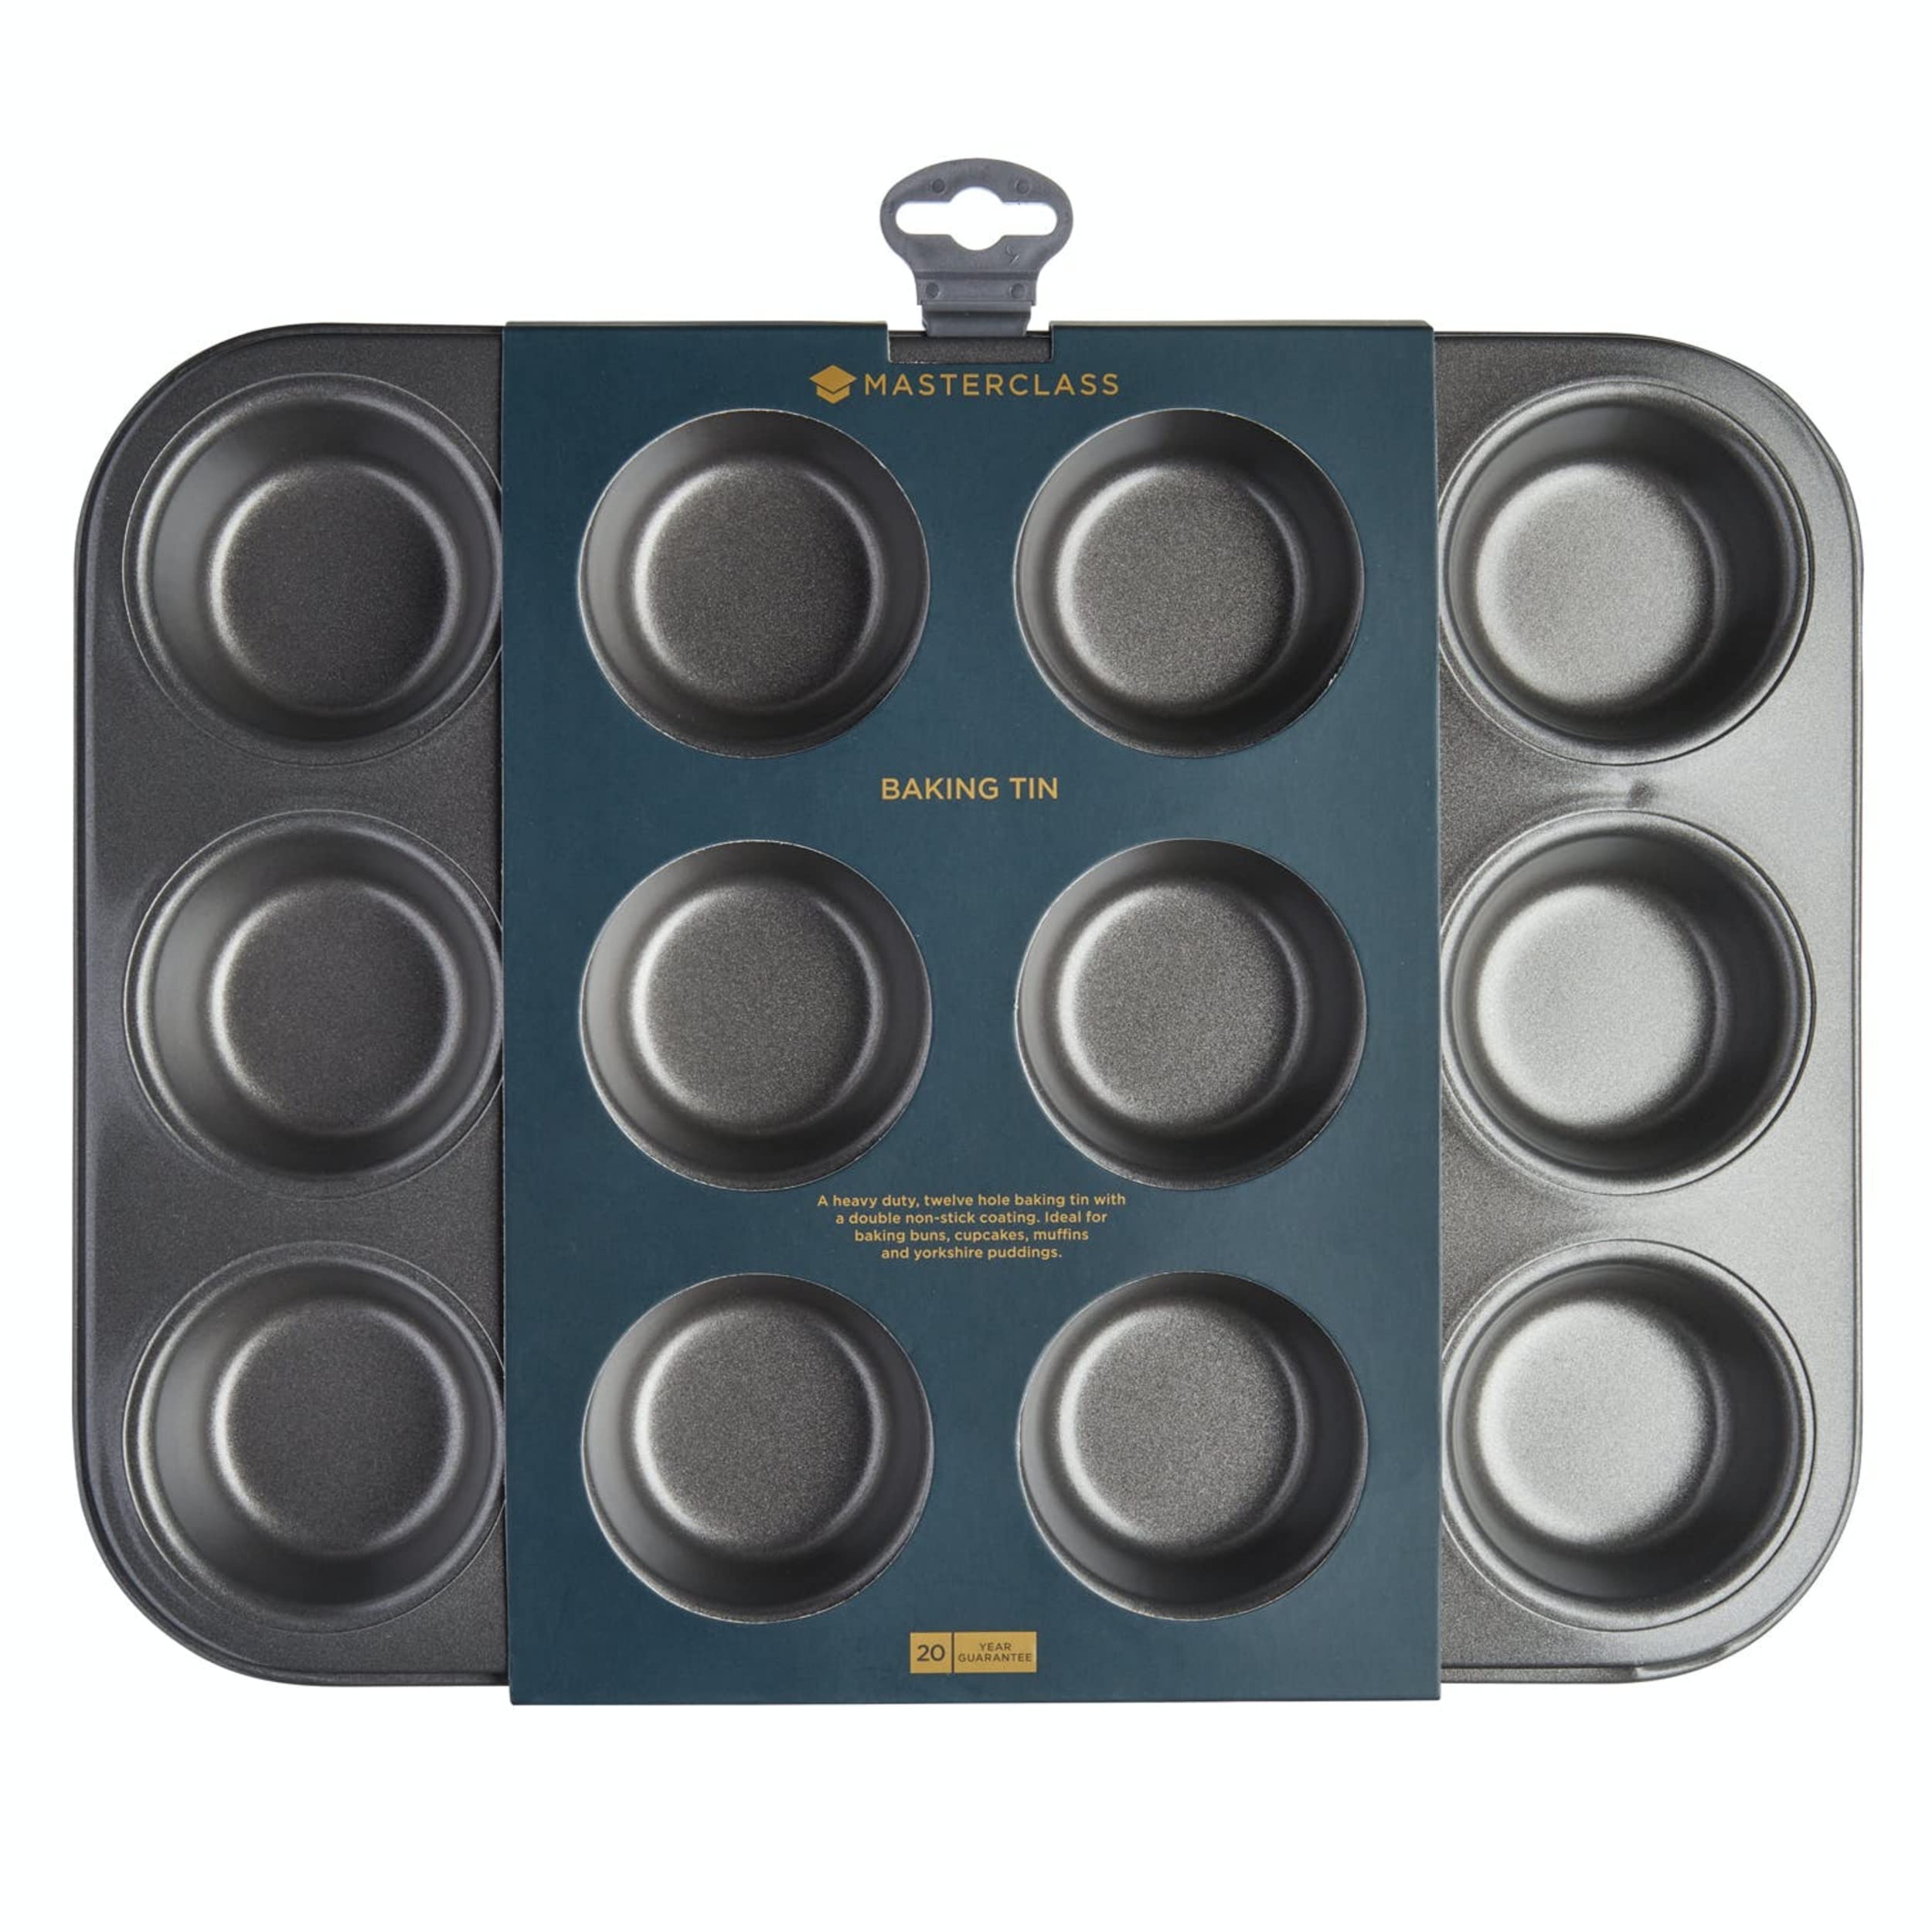 Masterclass Heavy Duty 12 Hole Cupcake Baking Tray Tin Pan with Double Layer Non-Stick Coating | Ideal for Baking Buns, Cupcakes, Yorkshire Puddings and Muffins